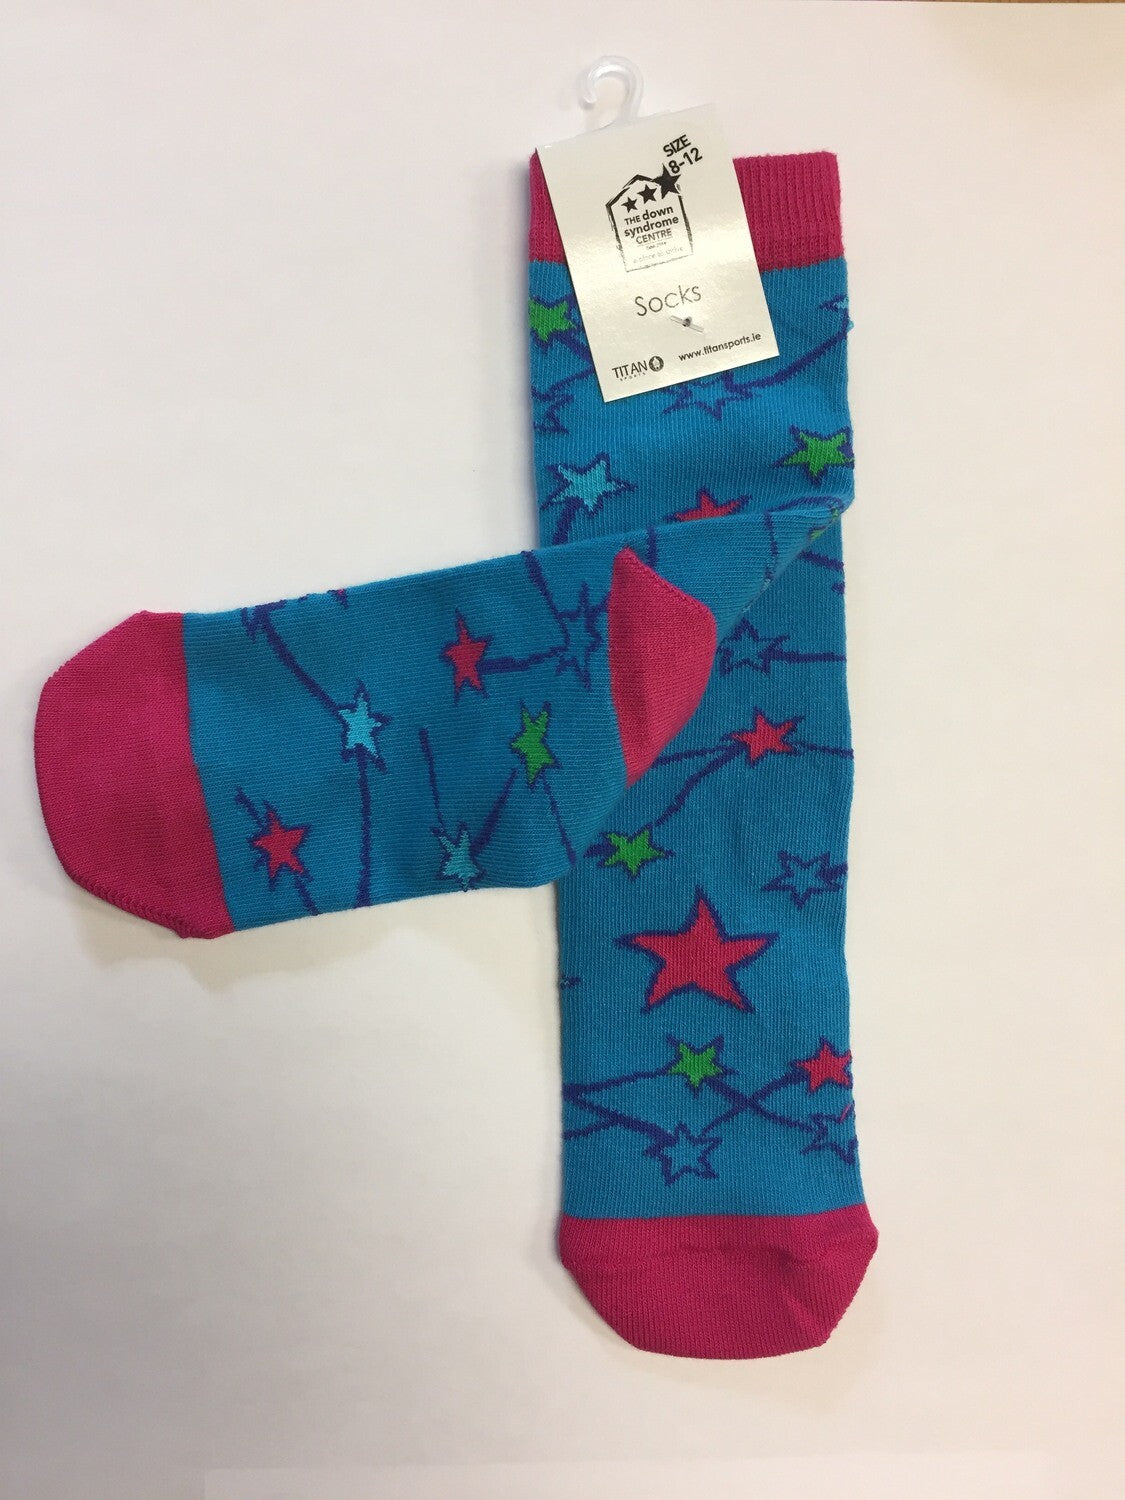 Adult World Down Syndrome Day socks